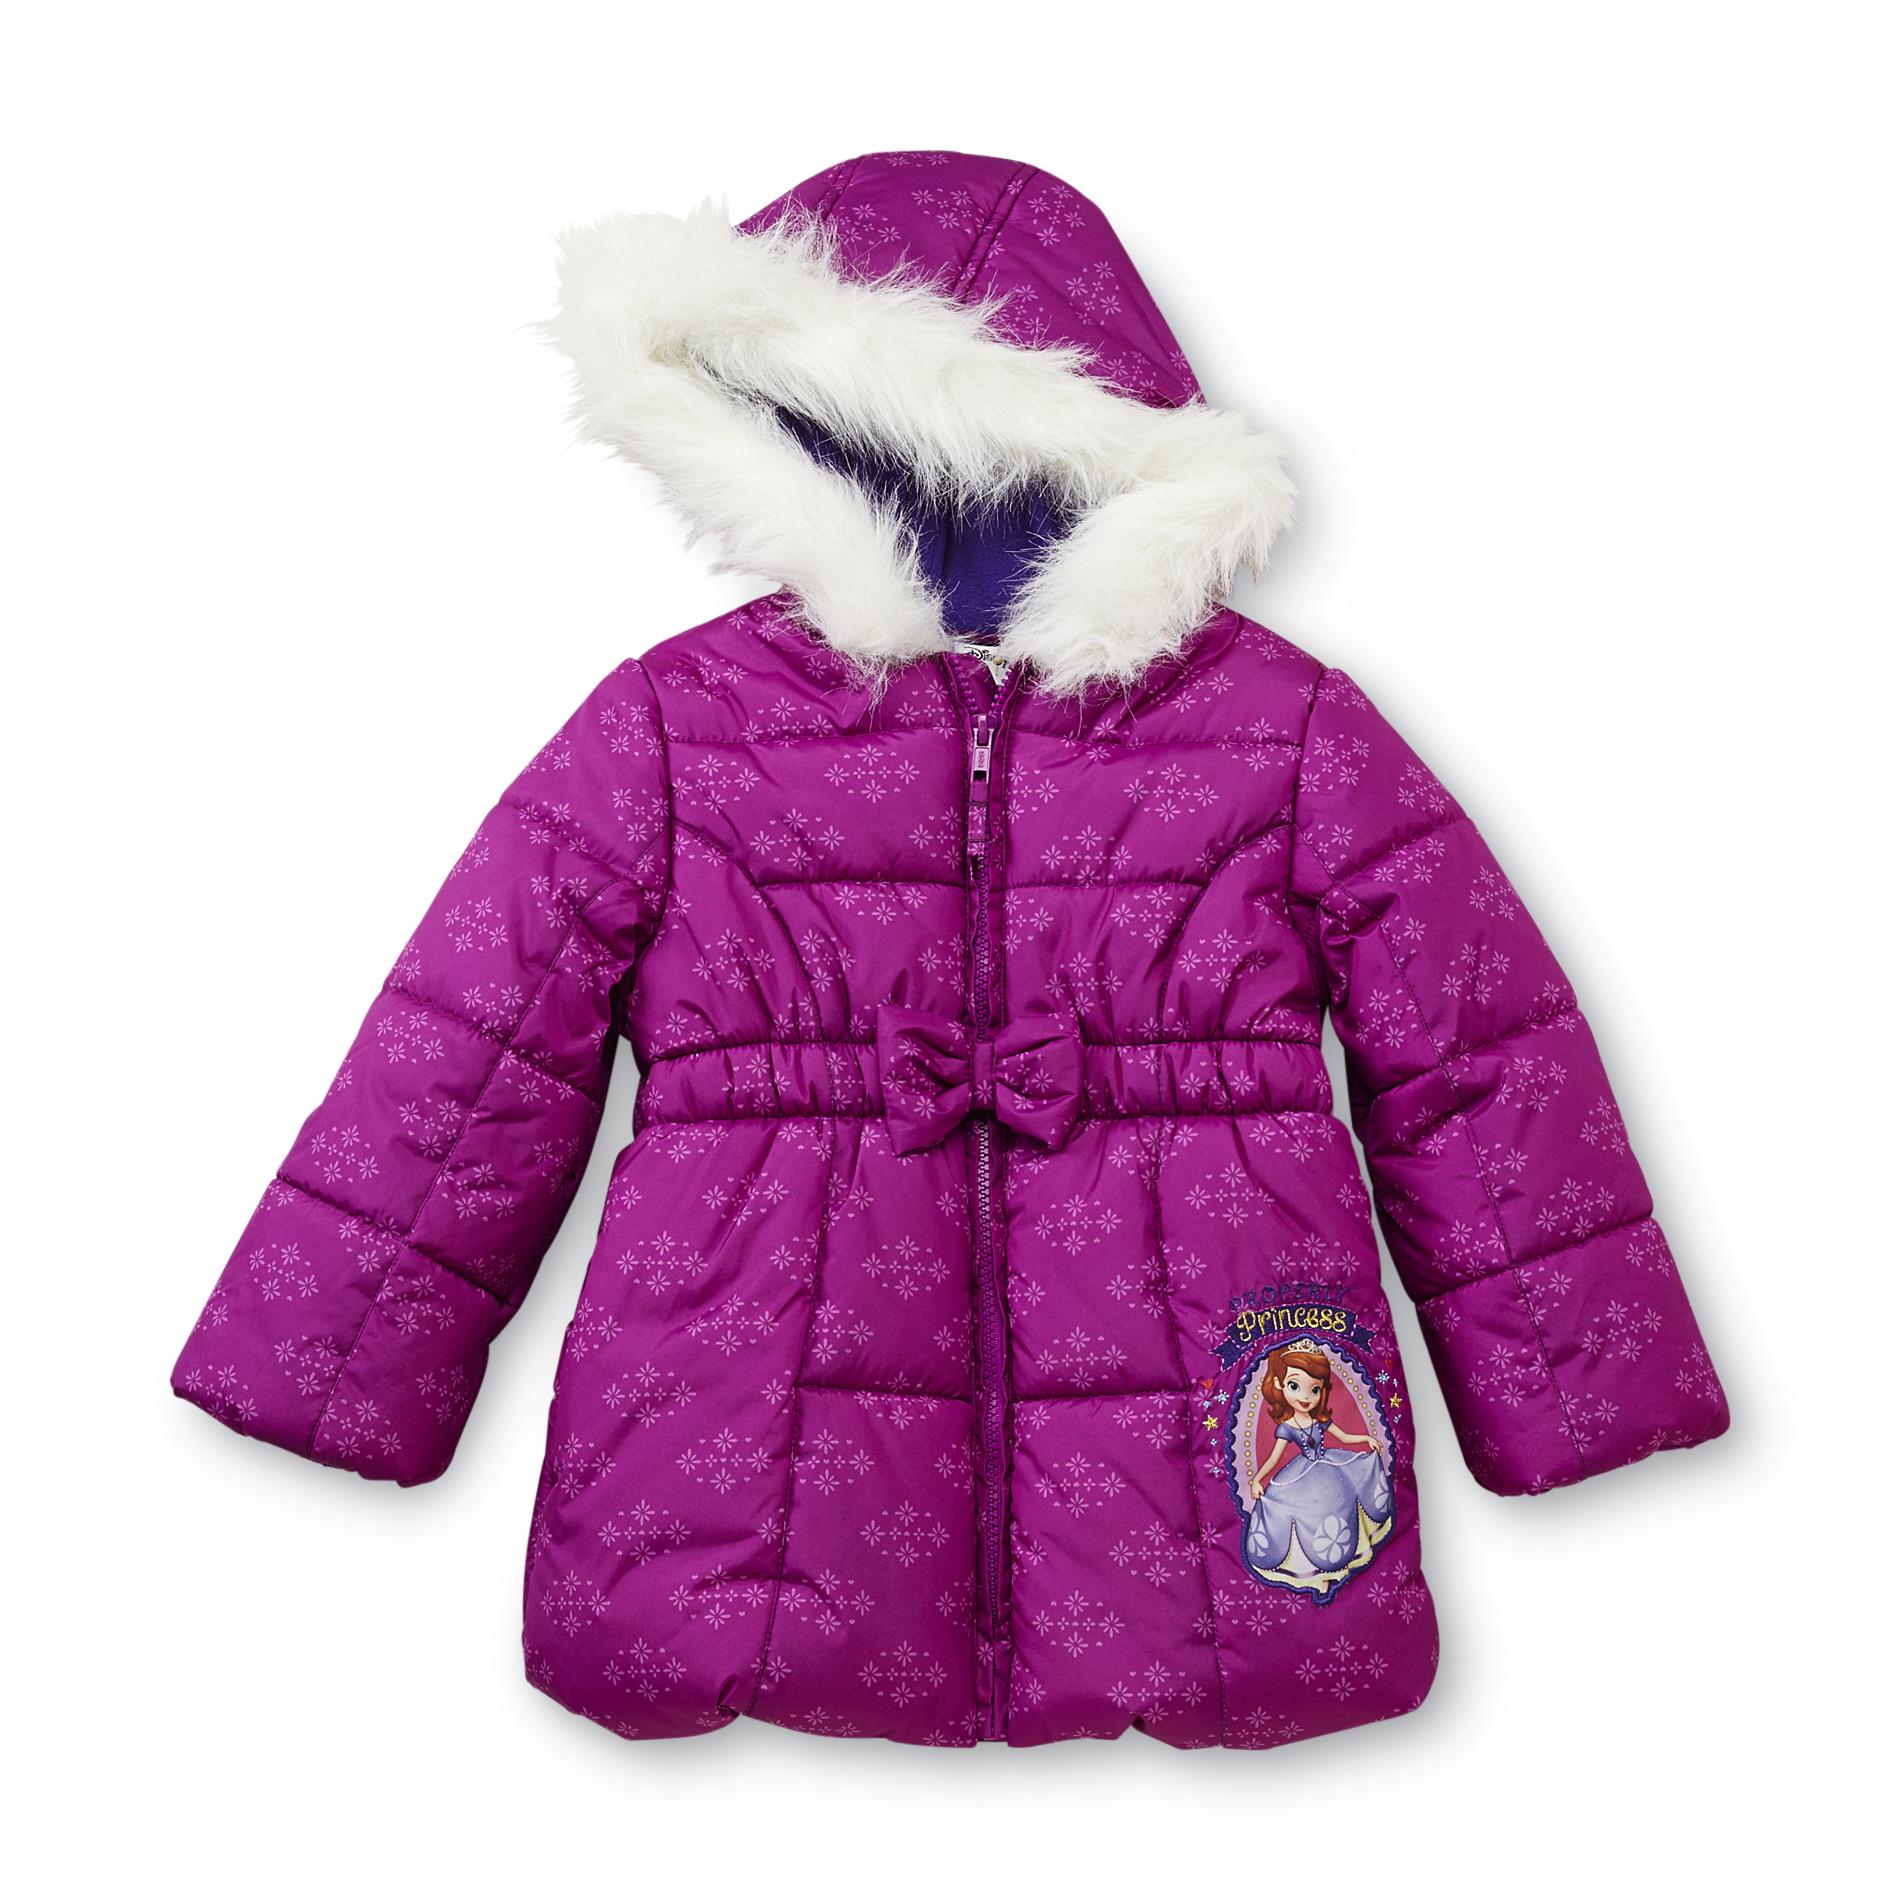 Disney Sofia the First Toddler Girl's Hooded Puffer Jacket